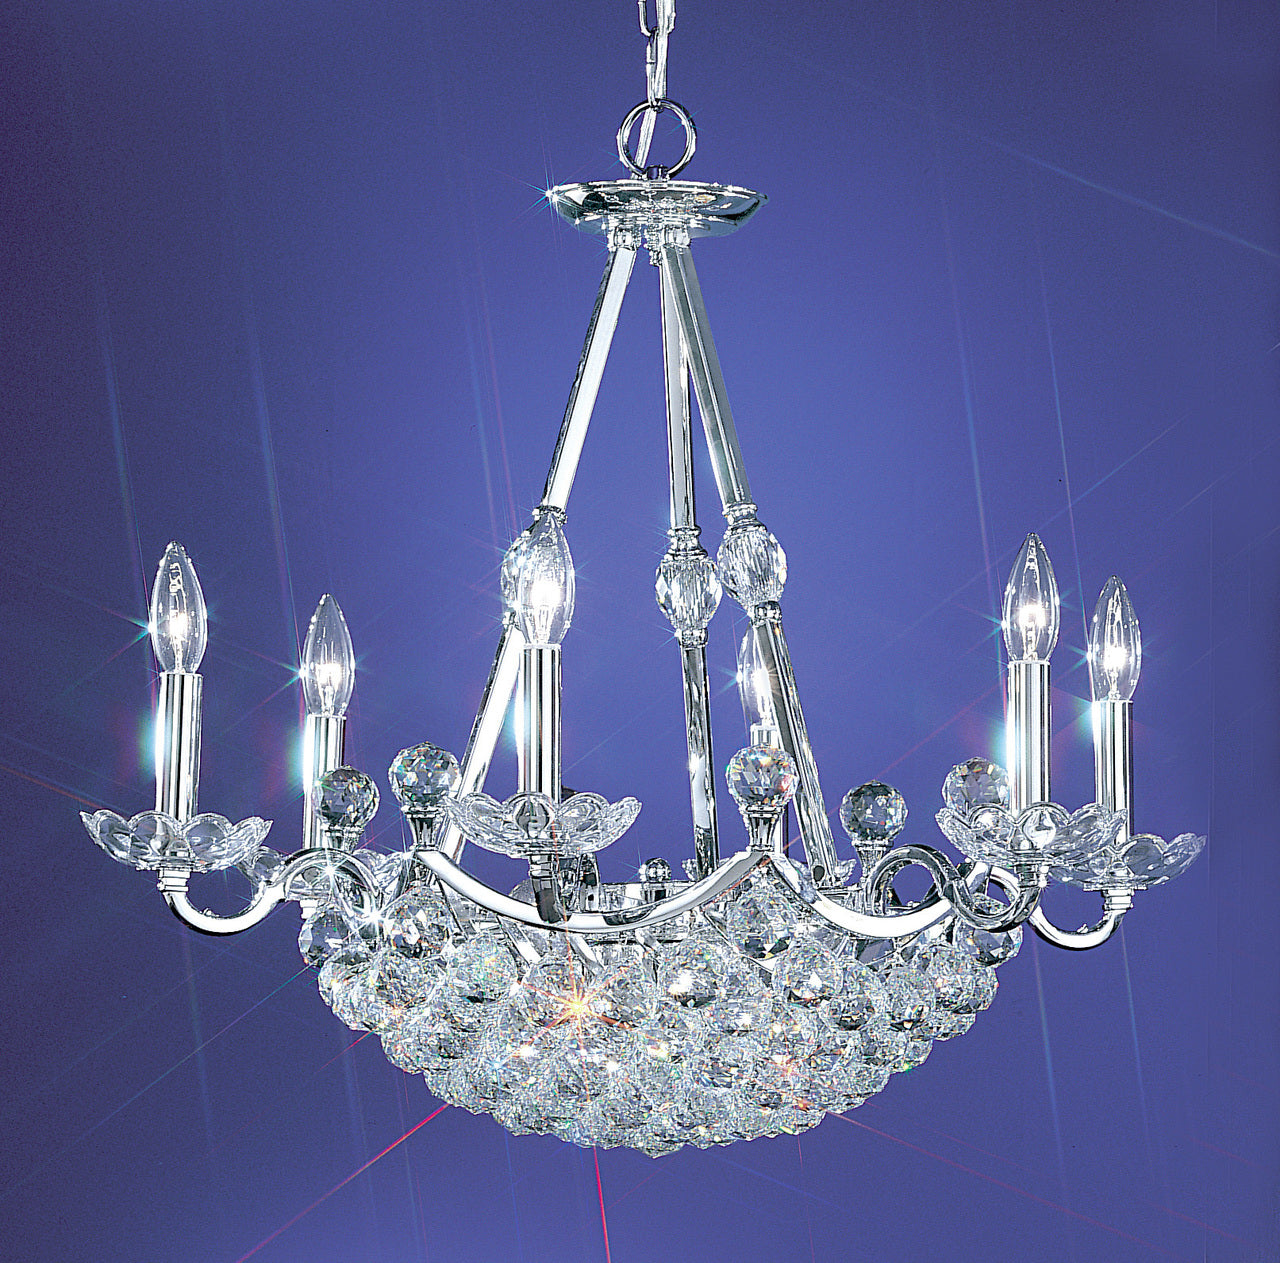 Classic Lighting 69776 CH SC Solitaire Crystal Chandelier in Chrome